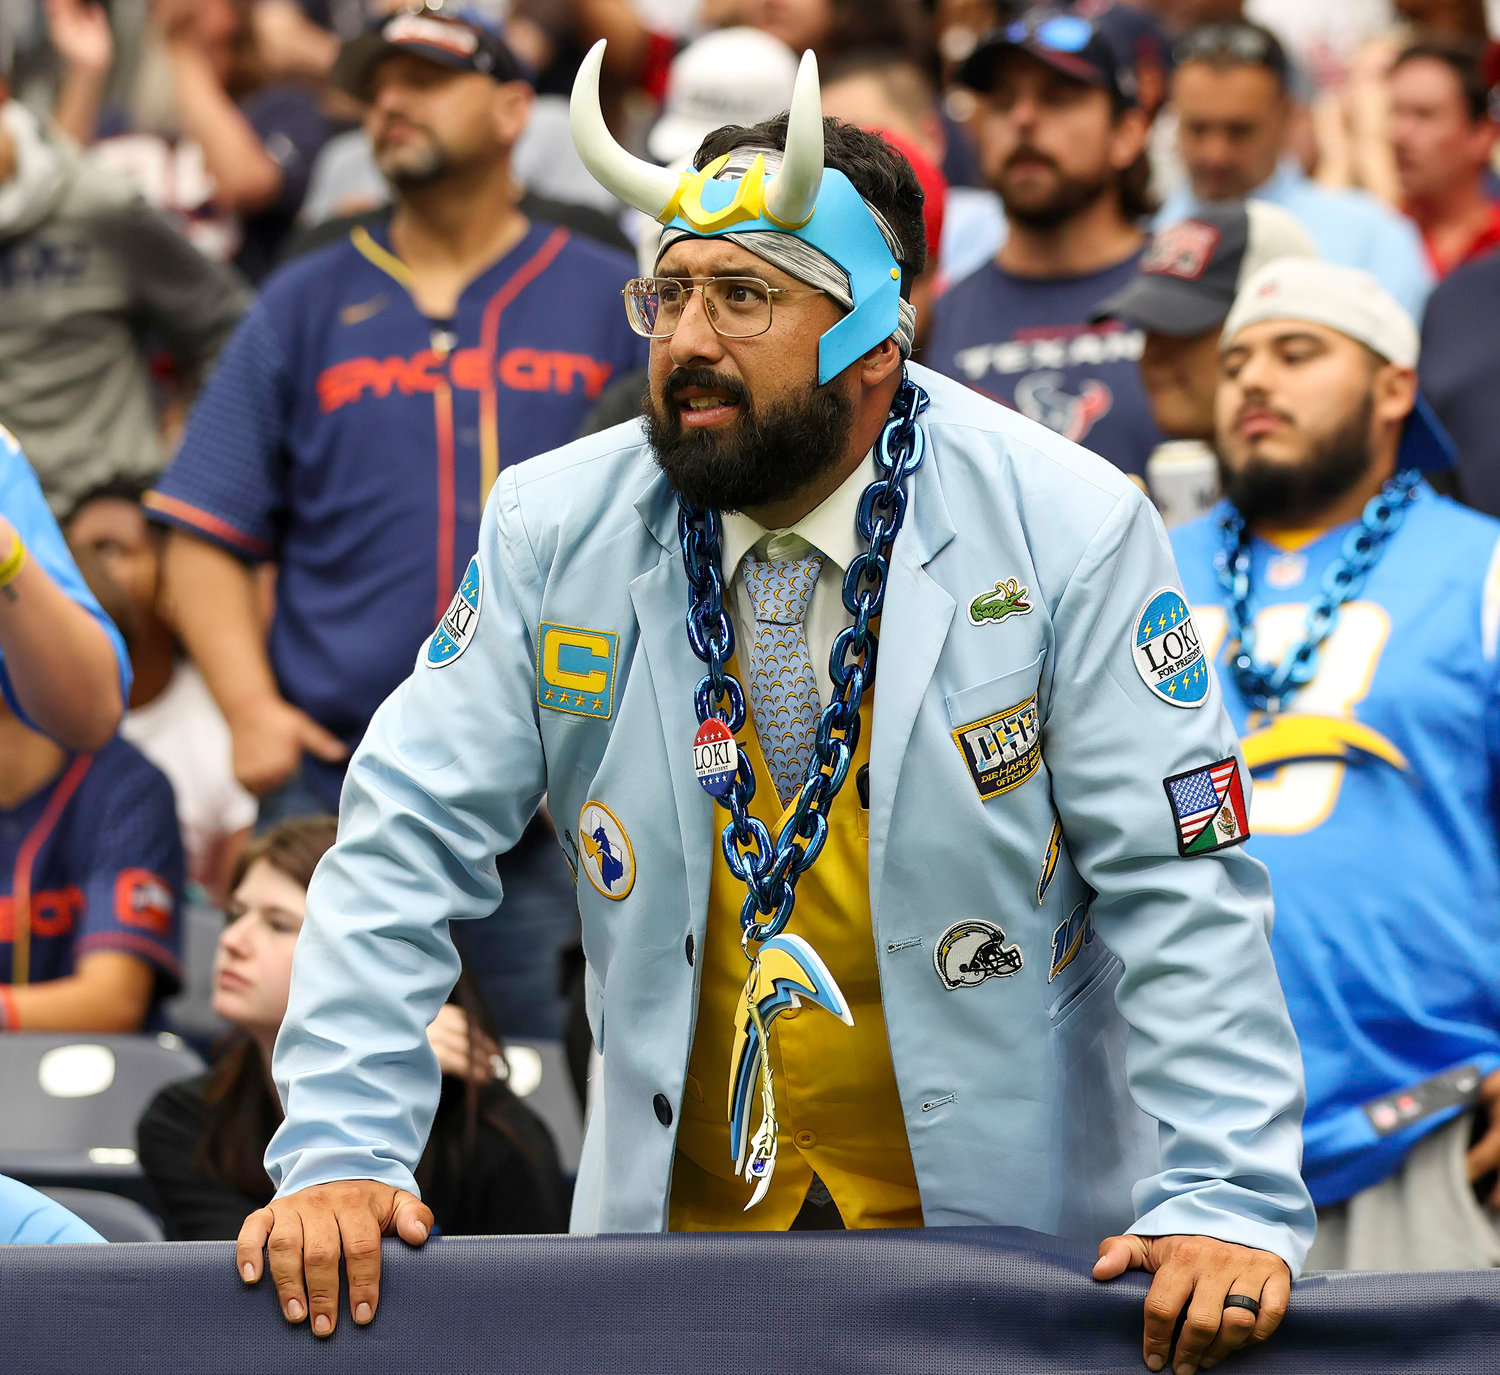 A Los Angeles Chargers fan during an NFL game between the Texans and the Chargers on Oct. 2, 2022 in Houston. The Chargers won 34-24.